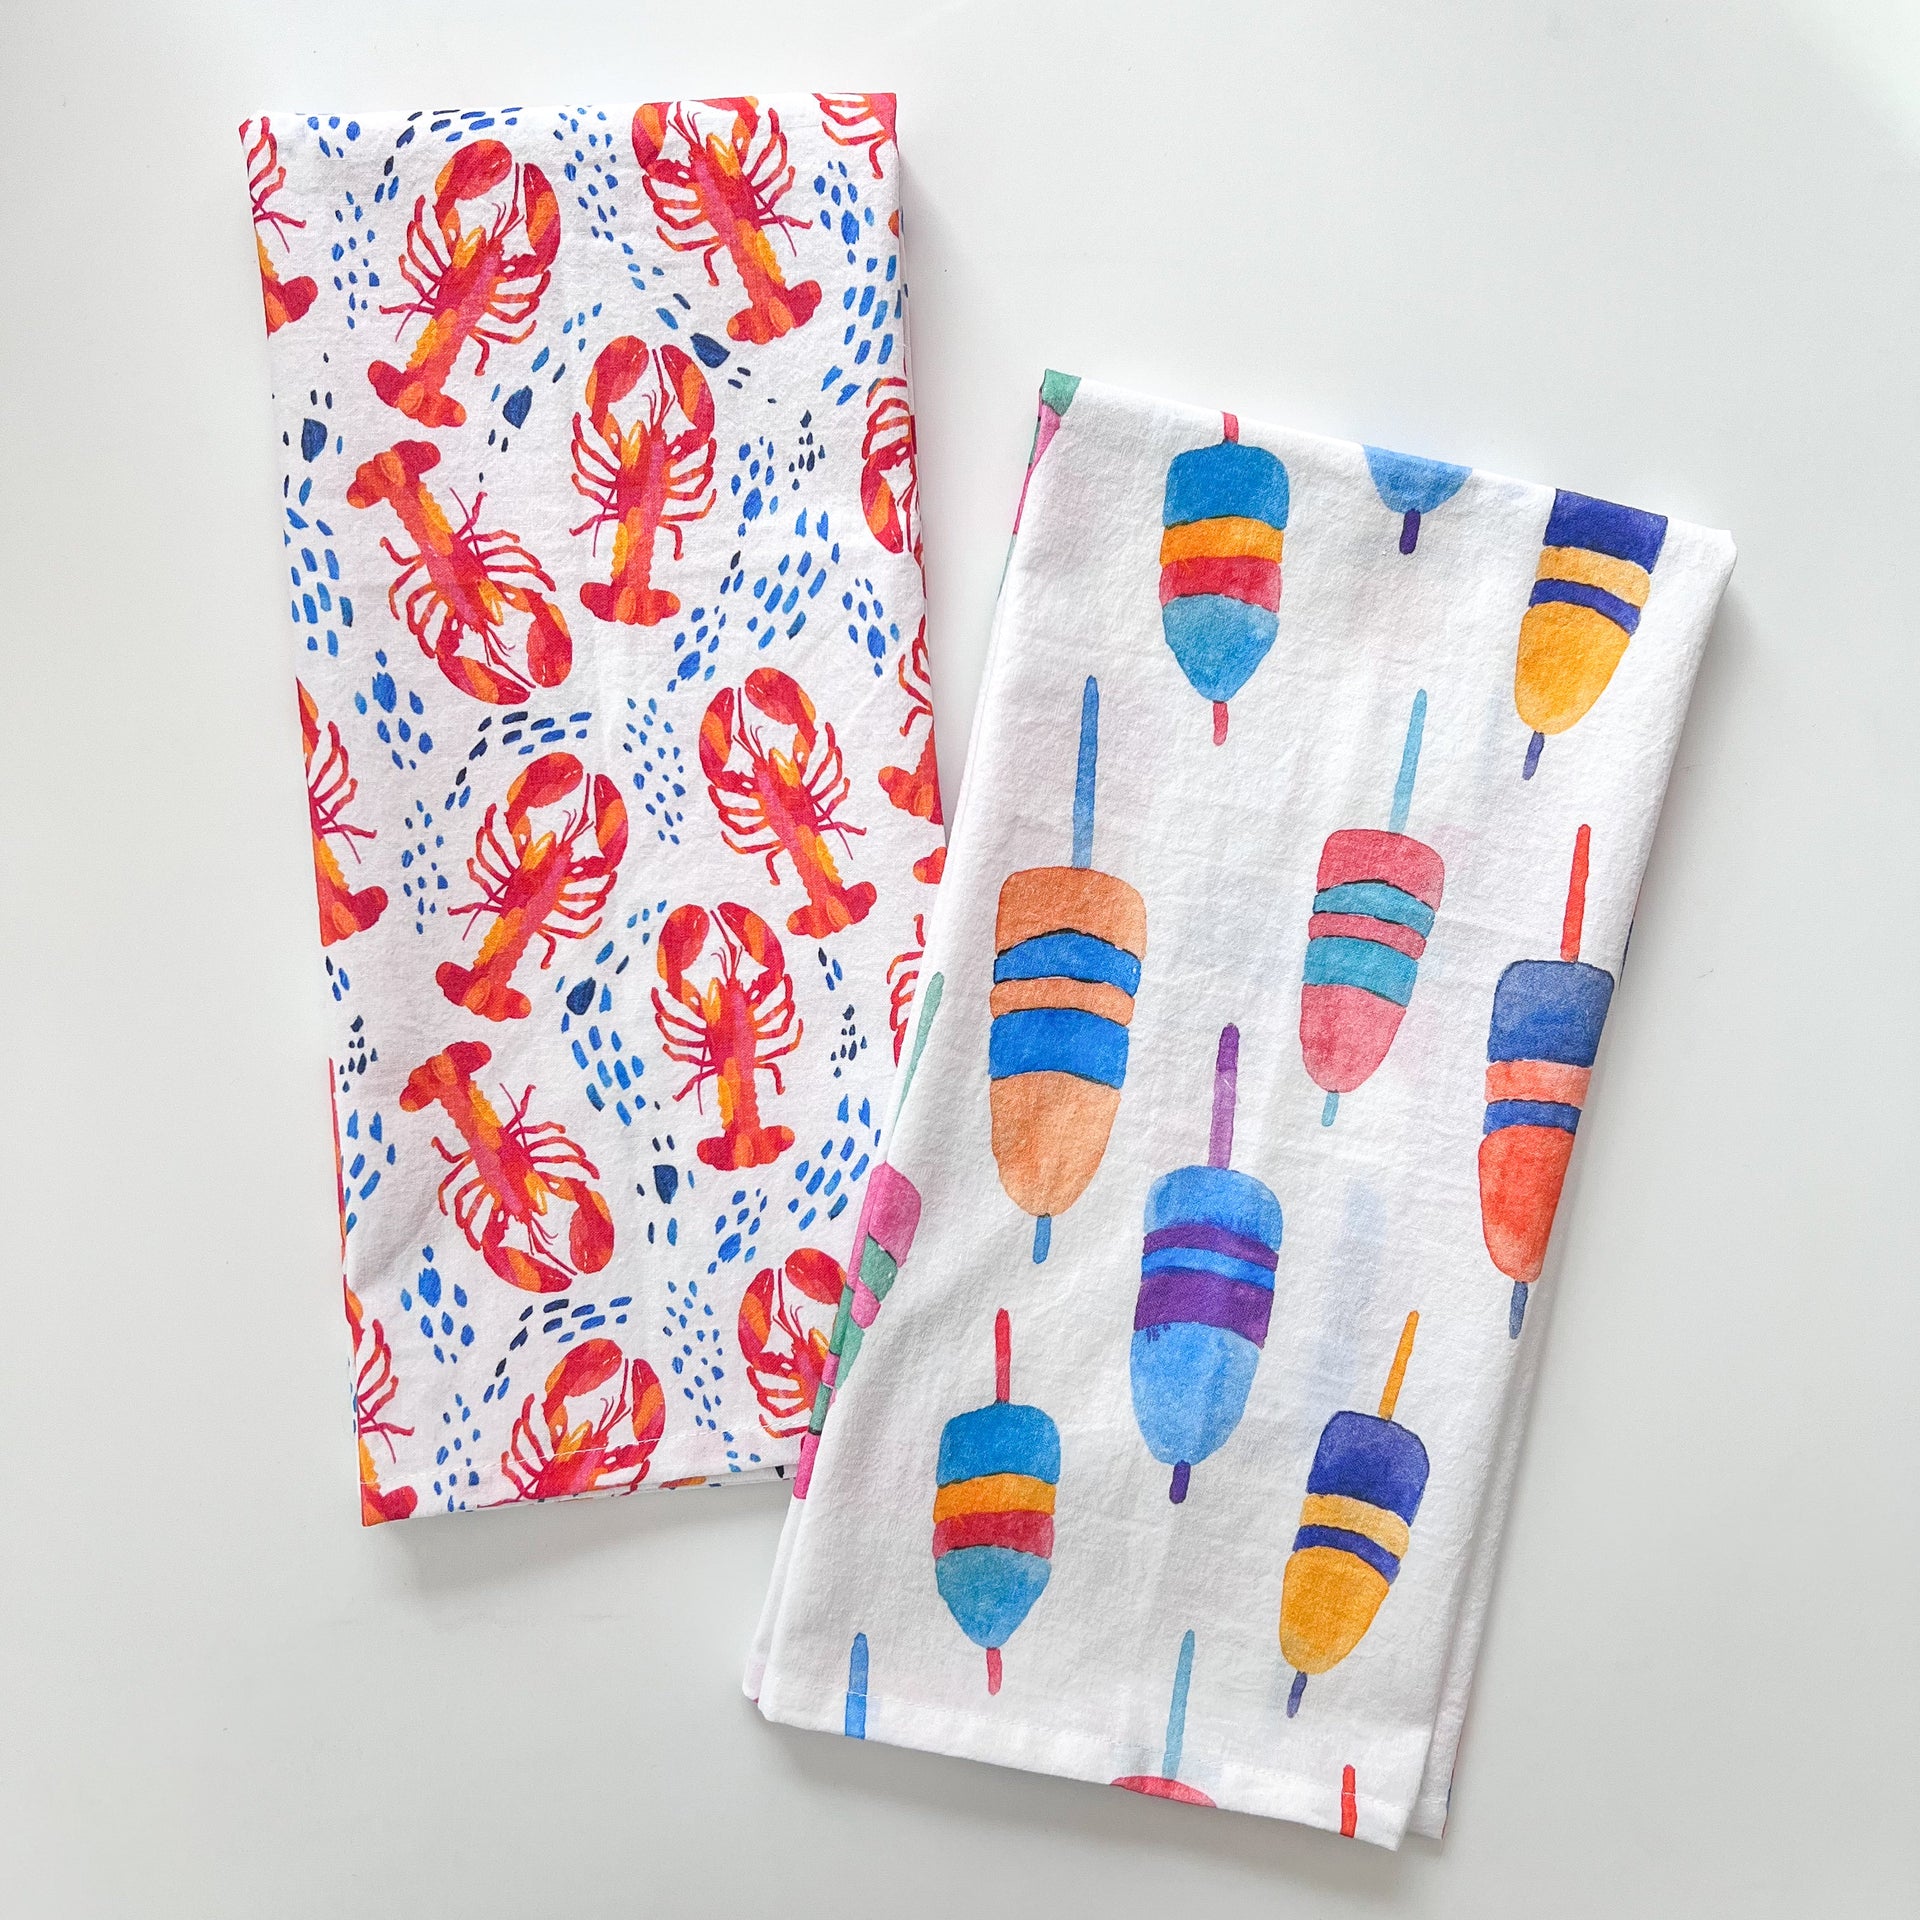 Lobsters in the Surf Tea Towel and Colorful buoys Tea Towel by Gert & Co